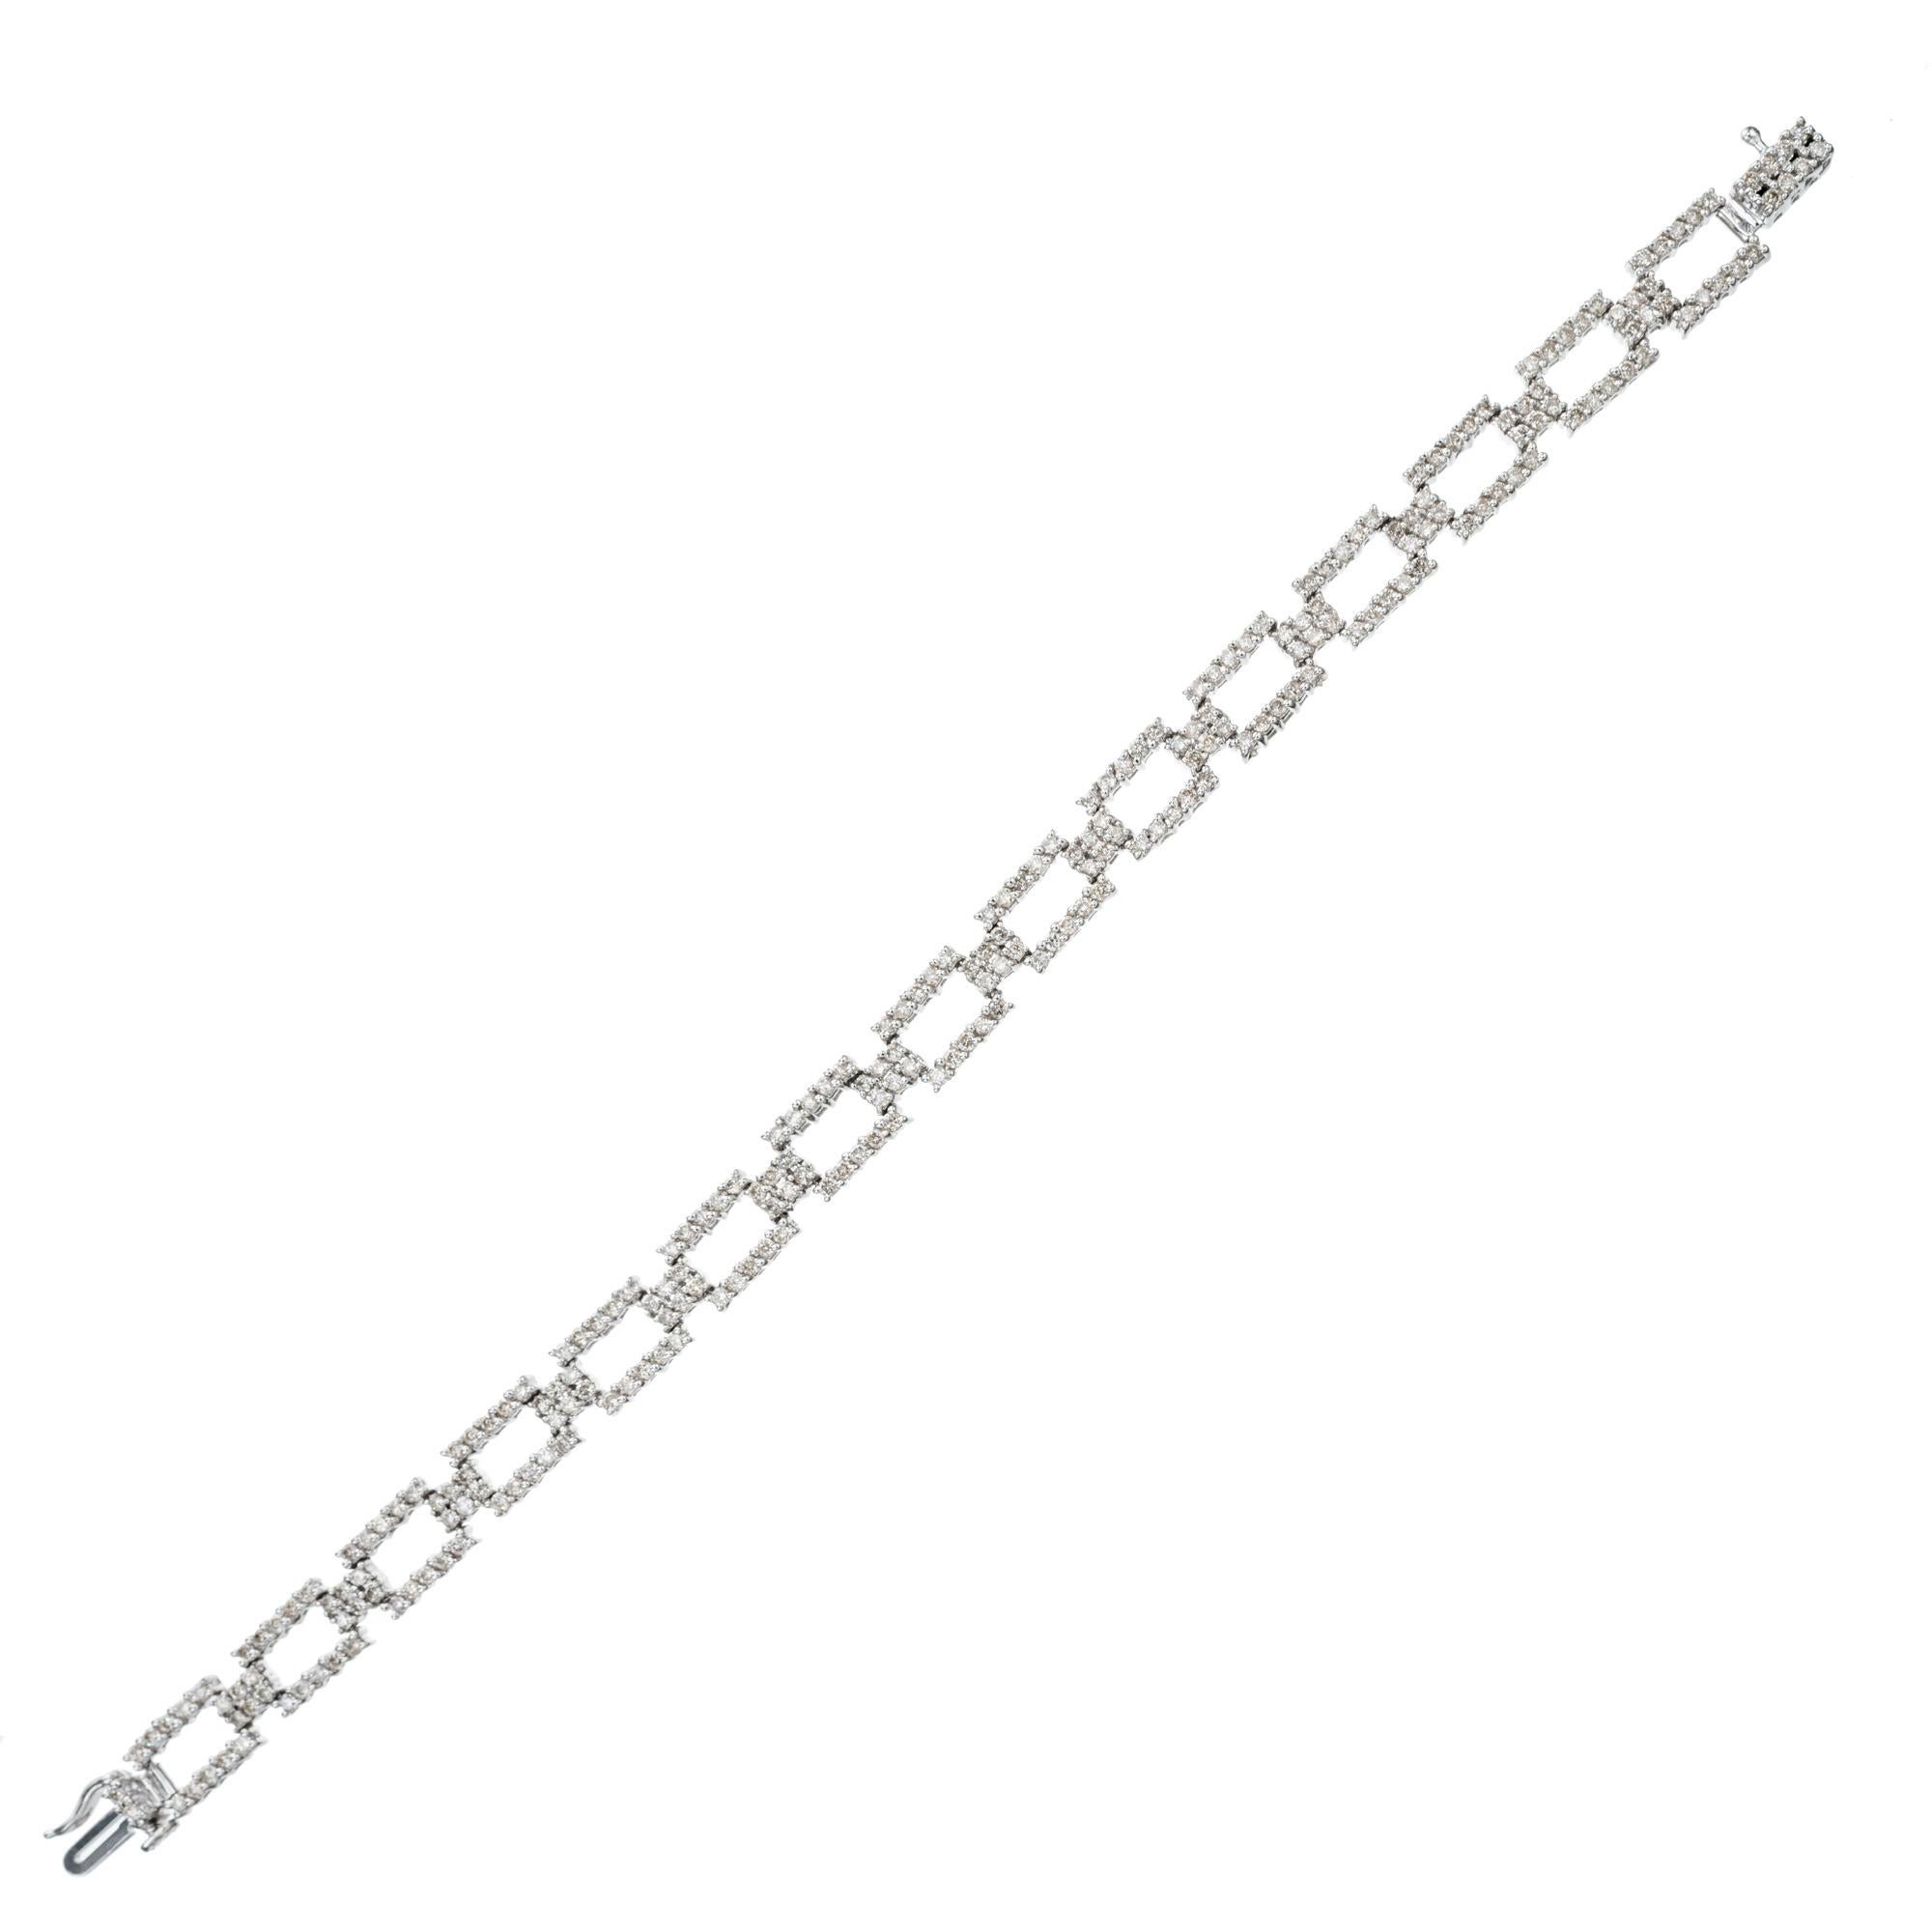 Diamond white gold link bracelet.  The bracelet consists of open rectangular links which are adorned with 244 round full cut diamonds totaling approximately 3.00cts. Connecting the links are diamond spacers. Made out of 14k white gold and measures